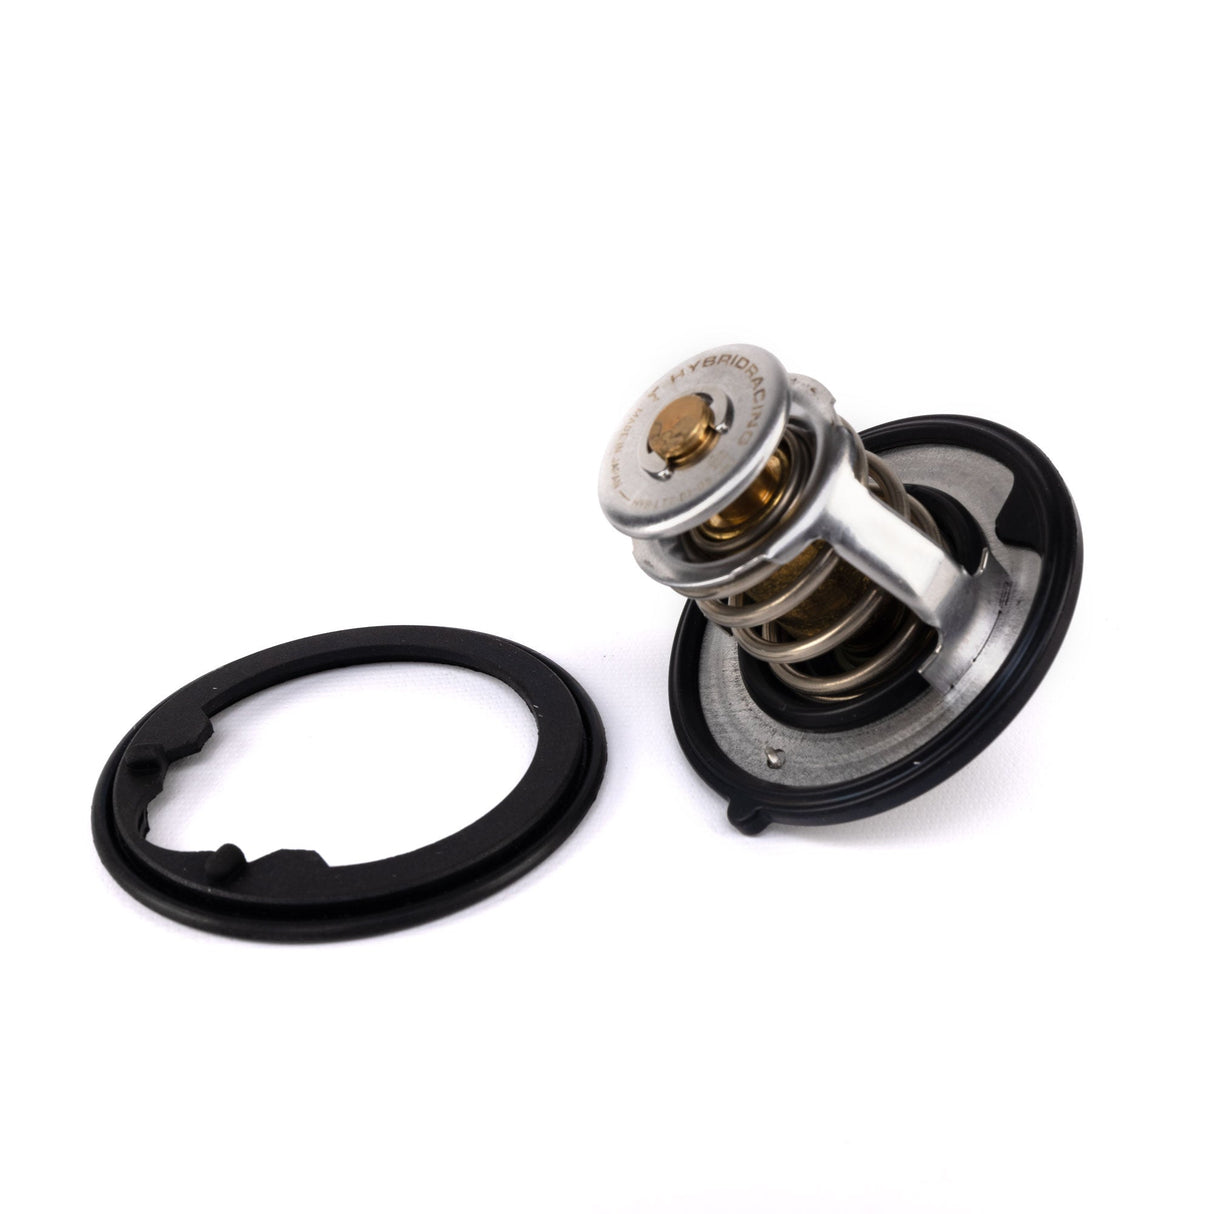 Hybrid Racing Low Temp Thermostat (For C-Series, J-Series, F-Series and H-Series)